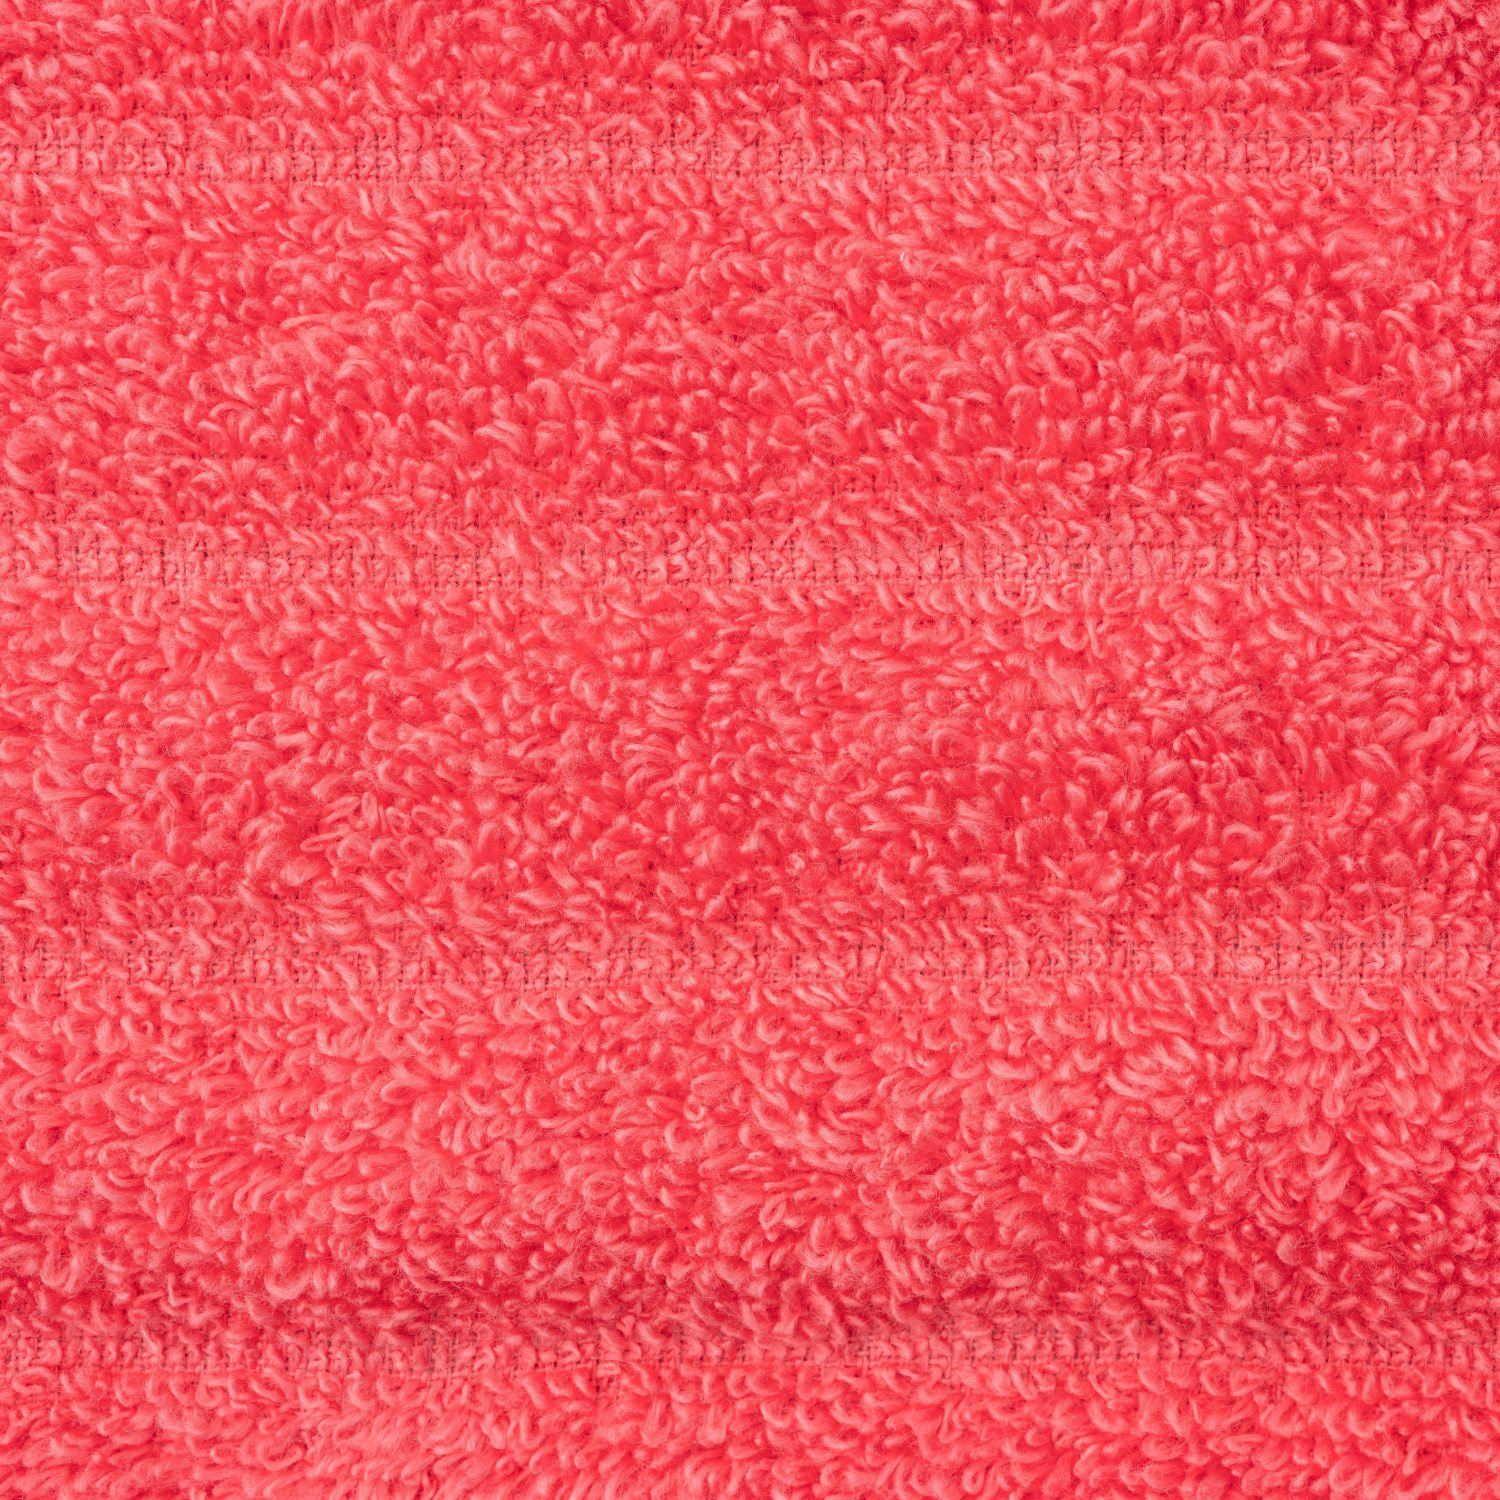 Mainstays Performance 6-Piece Towel Set, Textured Island Coral - image 6 of 7